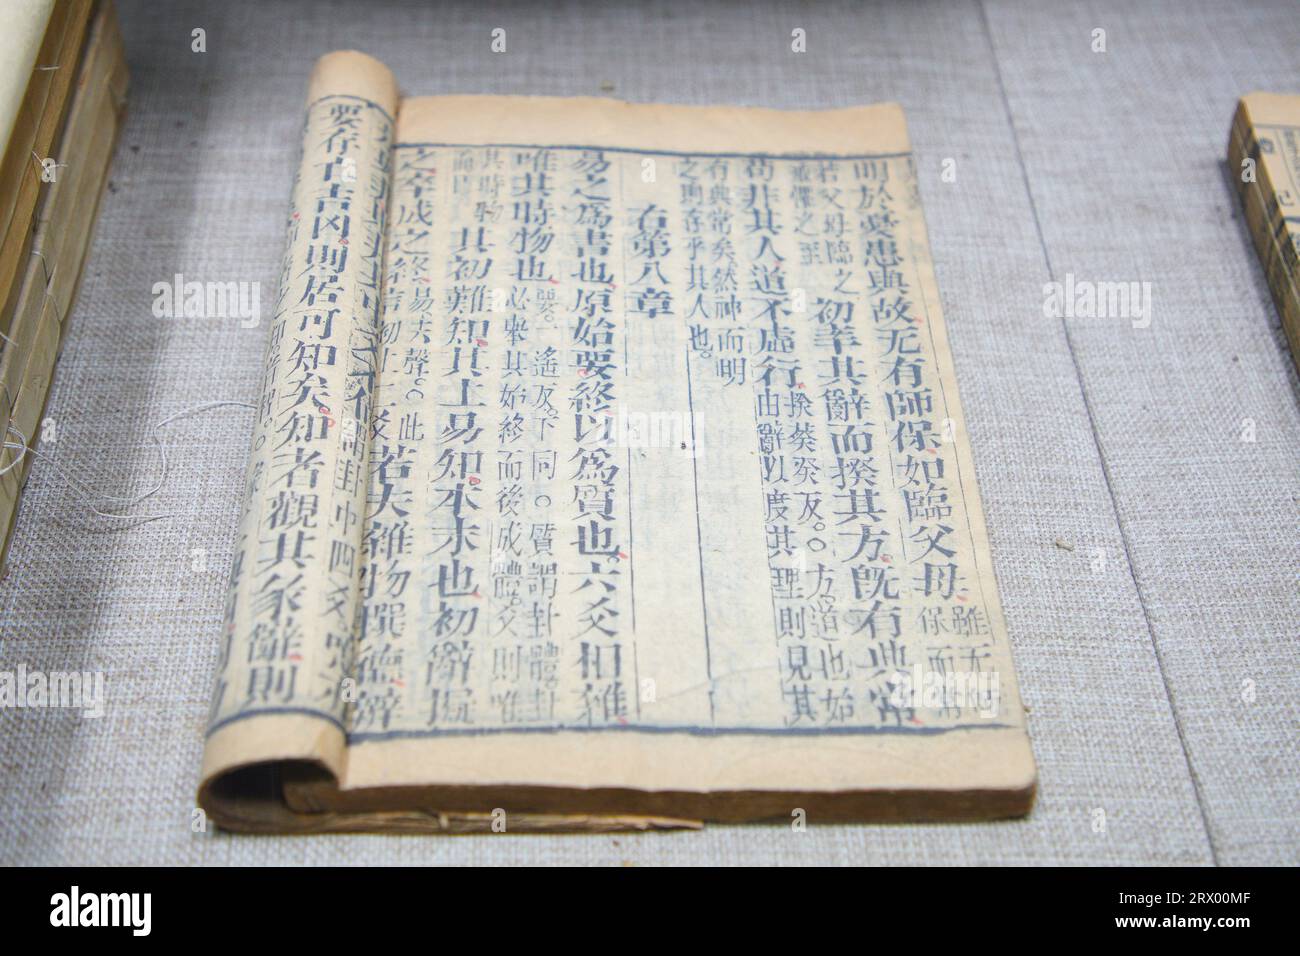 The Book of Changes in the Confucius Hall of Beijing Temple of Confucius Stock Photo